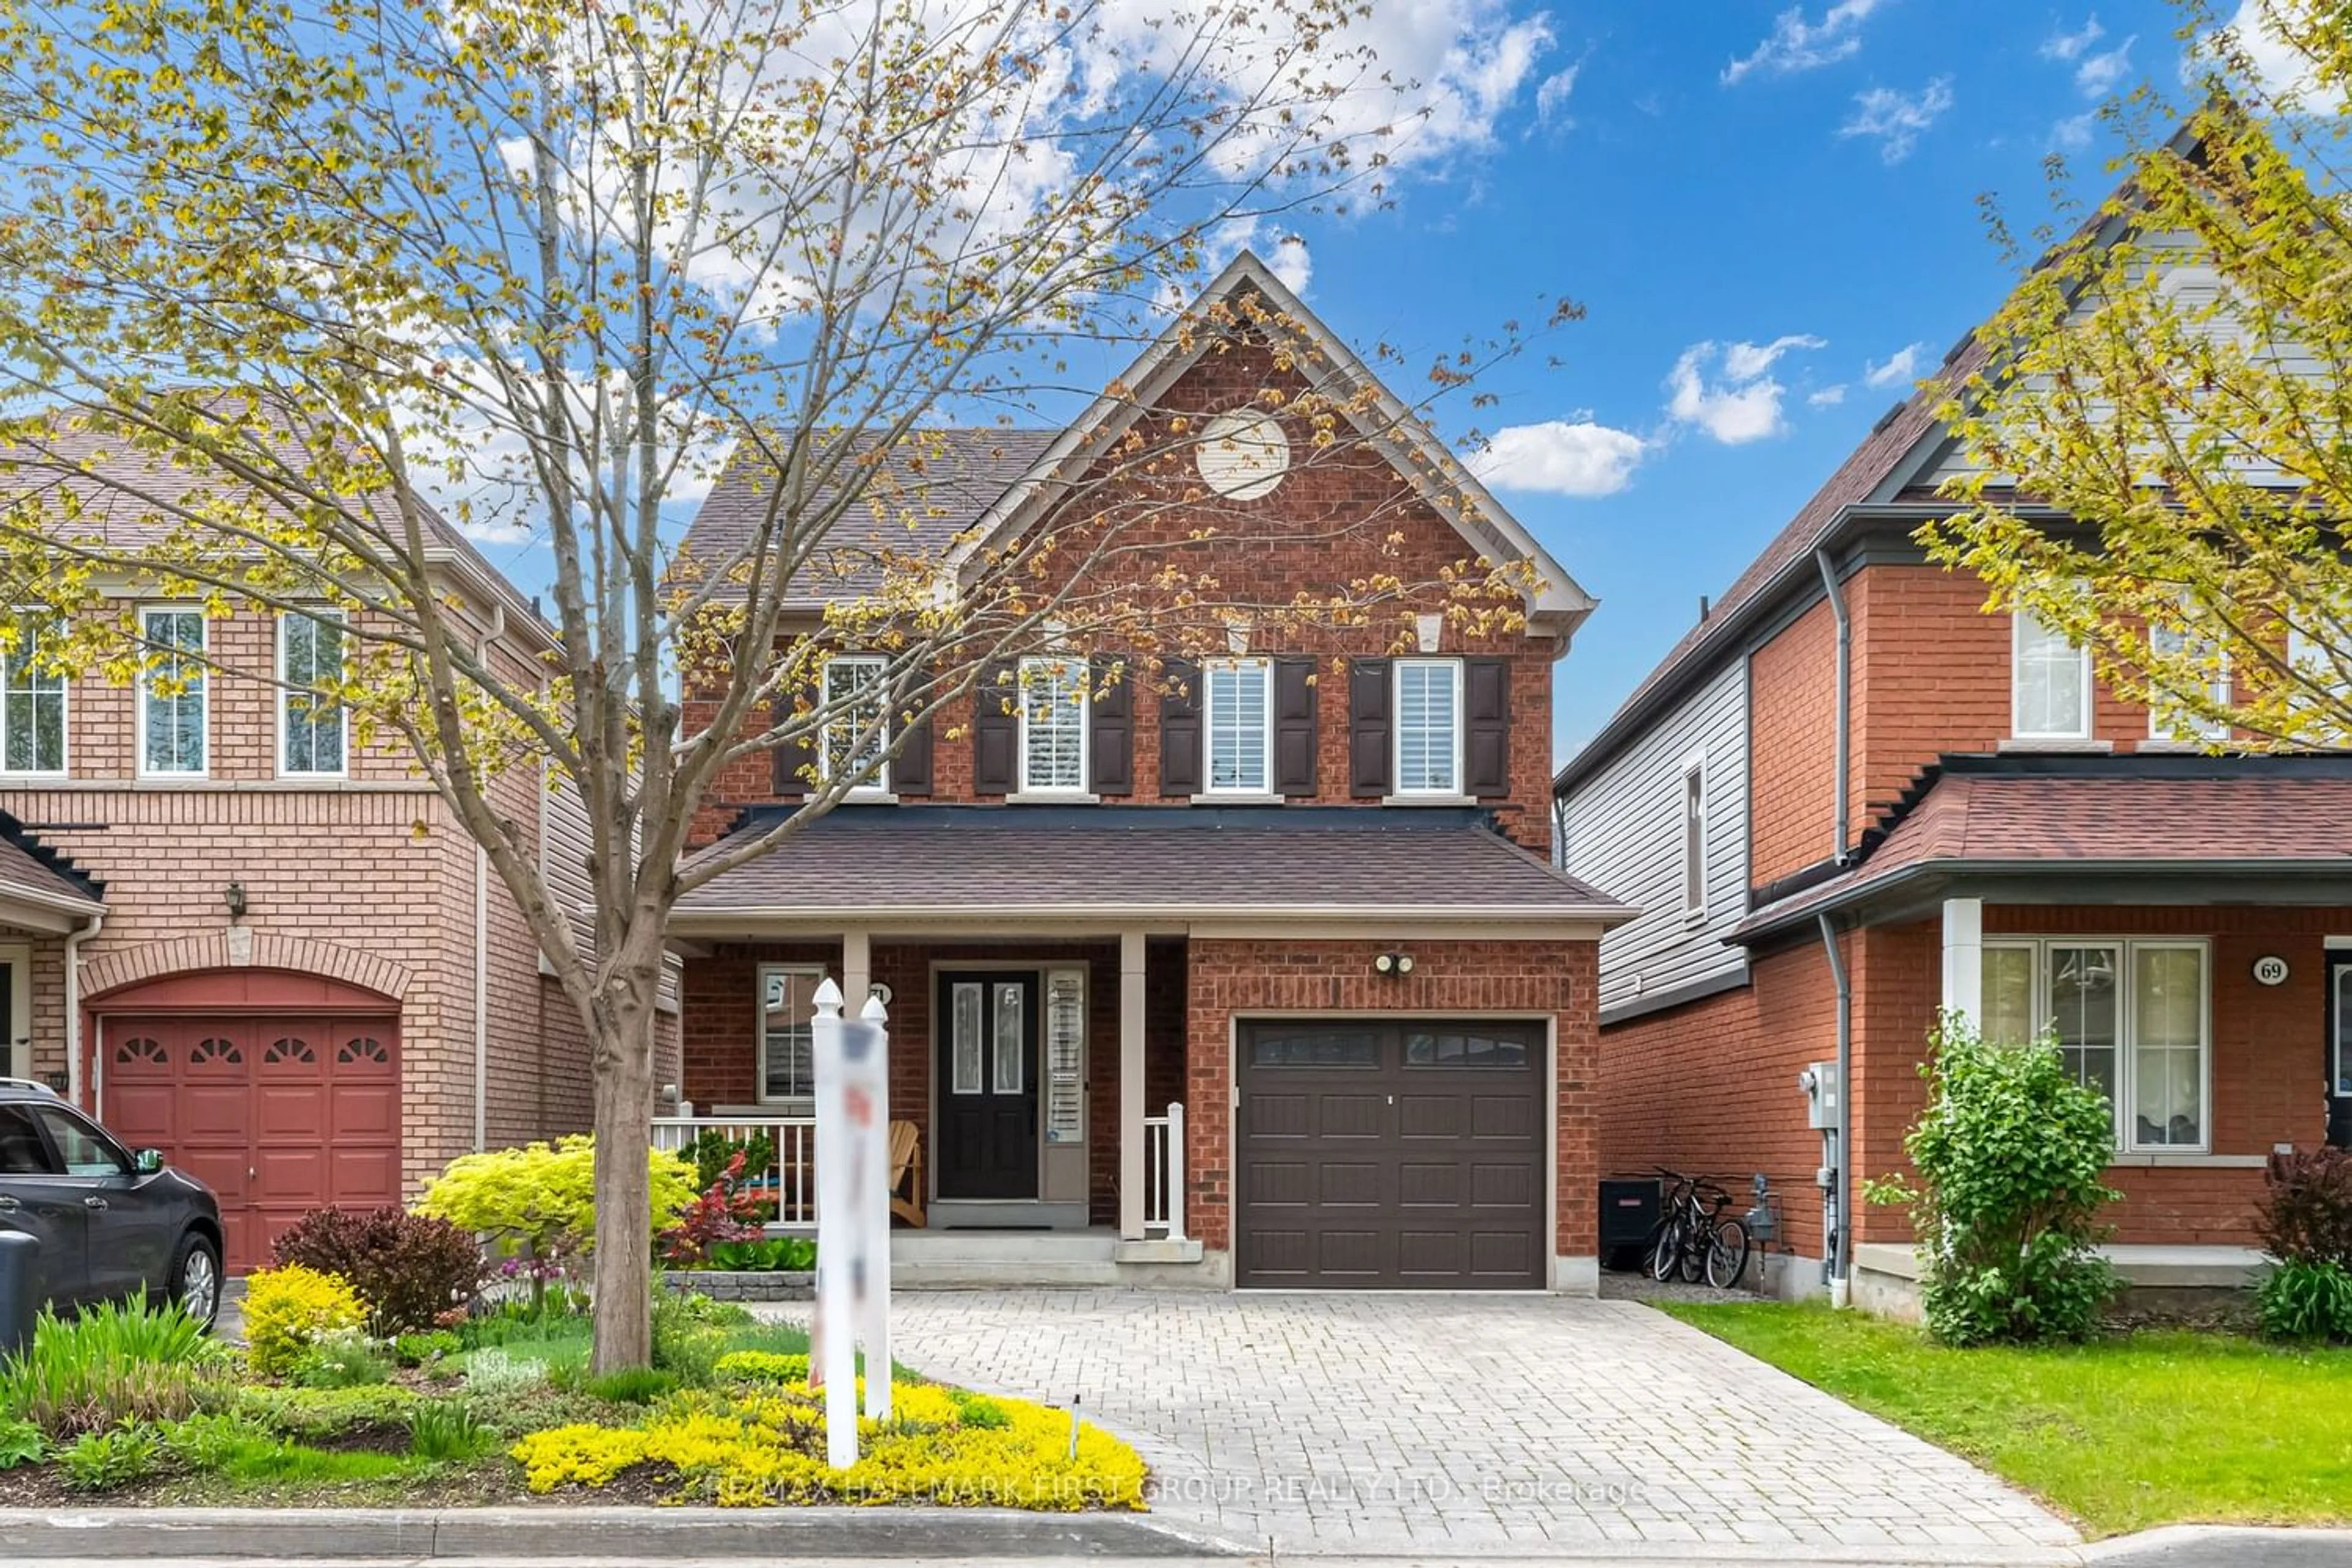 Home with brick exterior material for 71 Tansley Cres, Ajax Ontario L1Z 1Y6